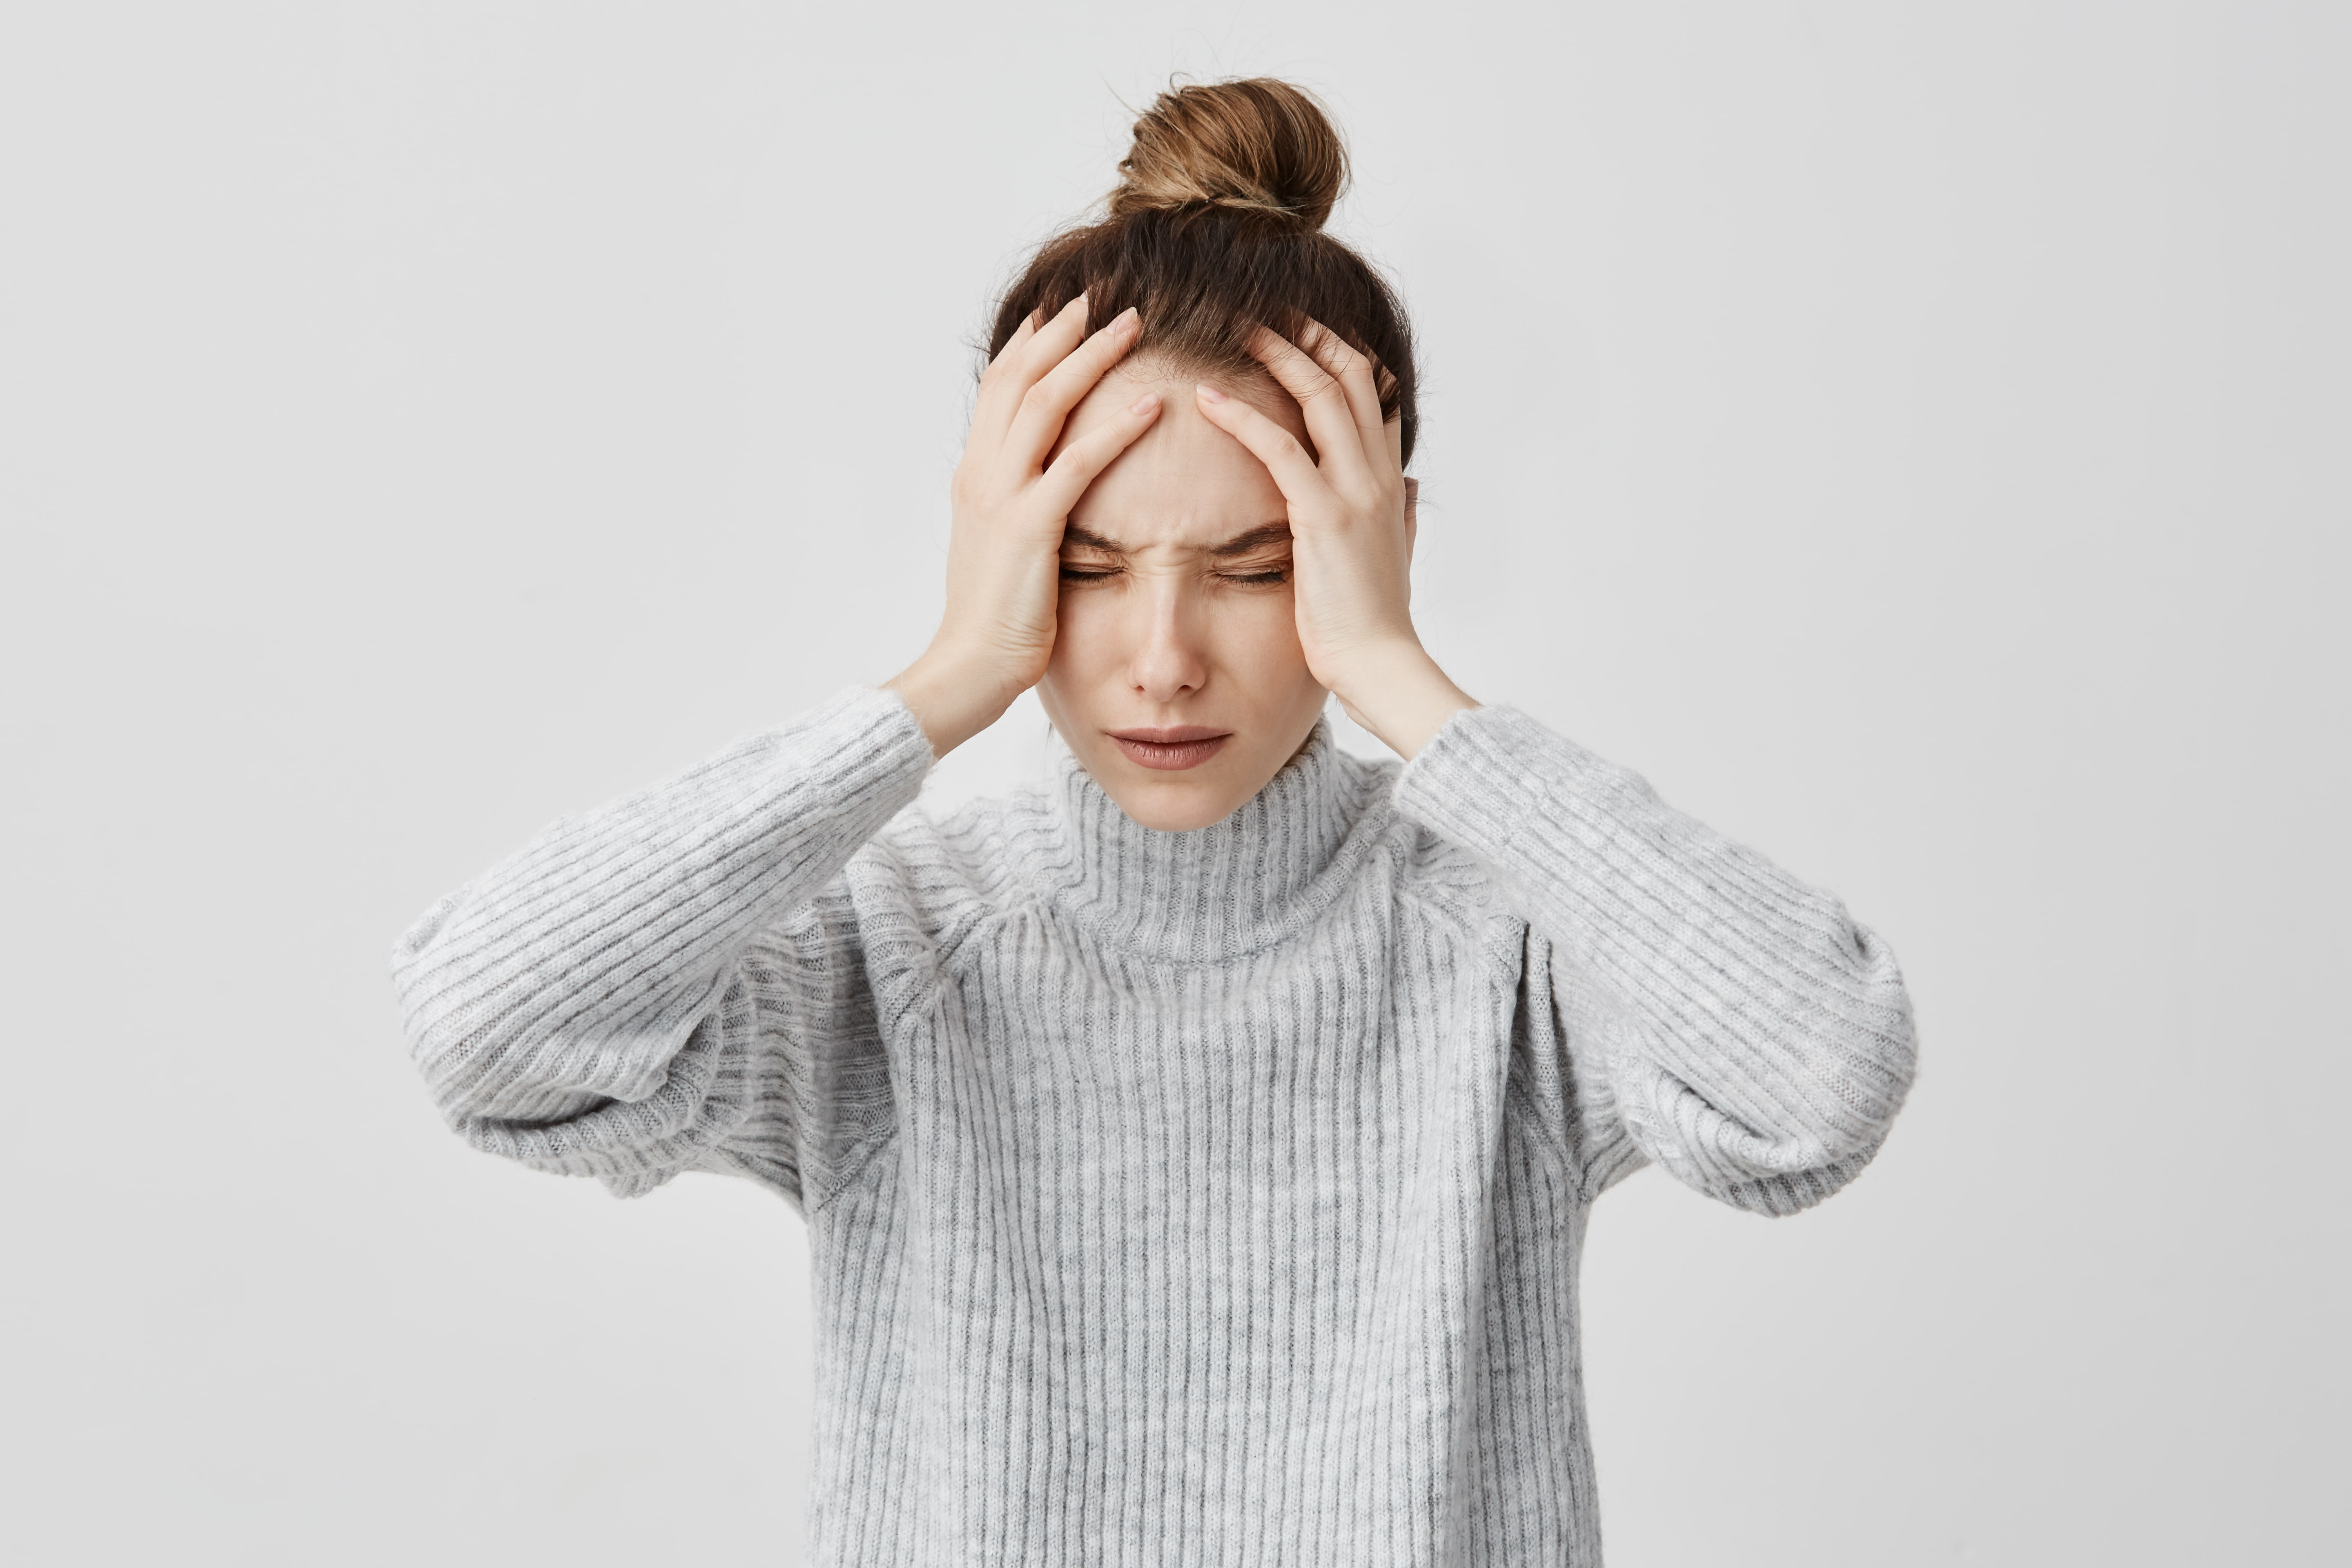 Causes and How to Manage Stress in the Work Environment